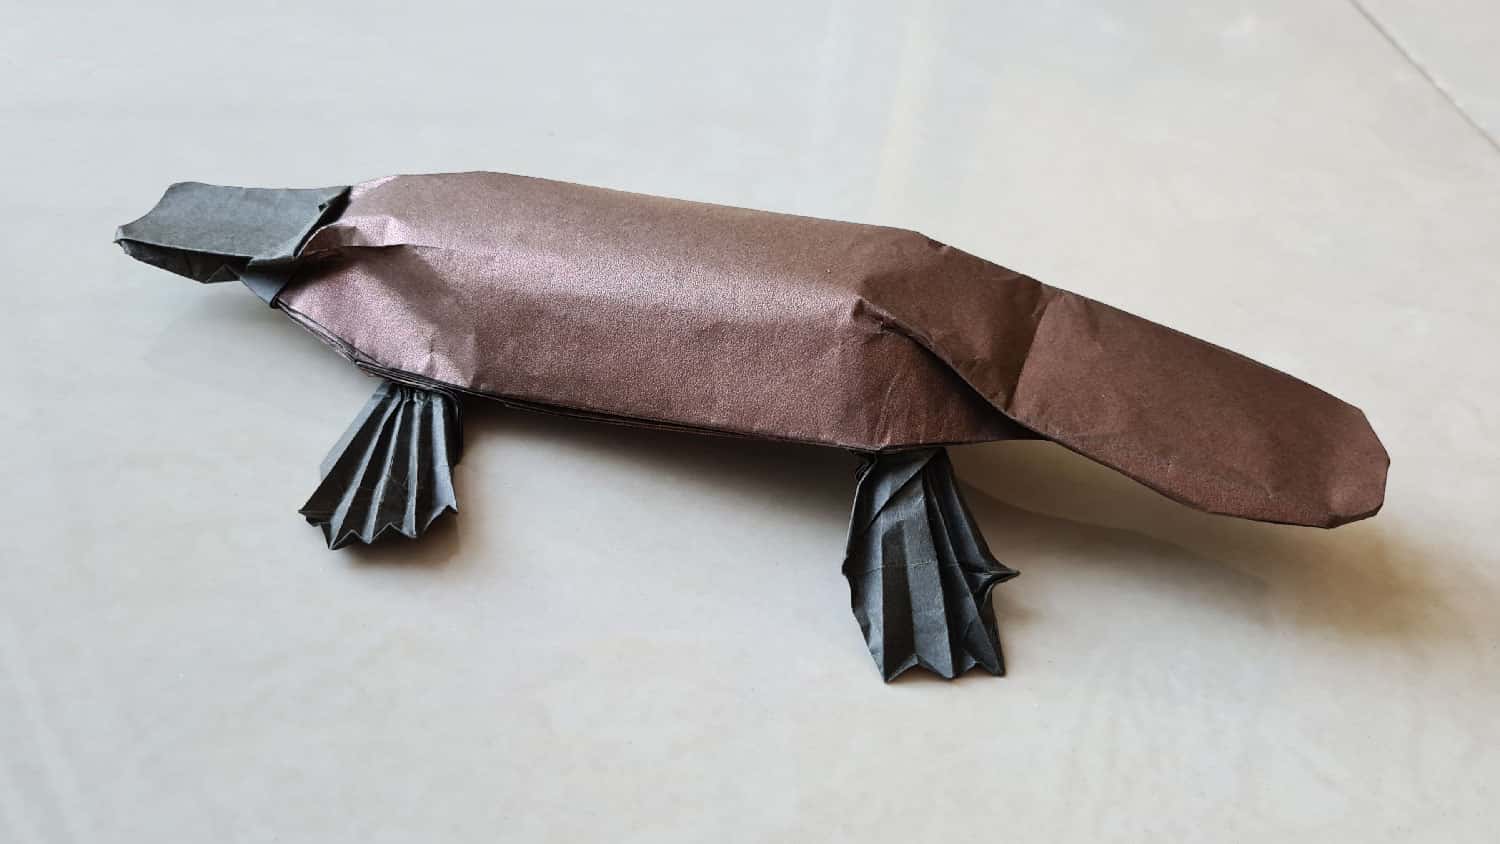 A folded origami platypus model, viewed from the side